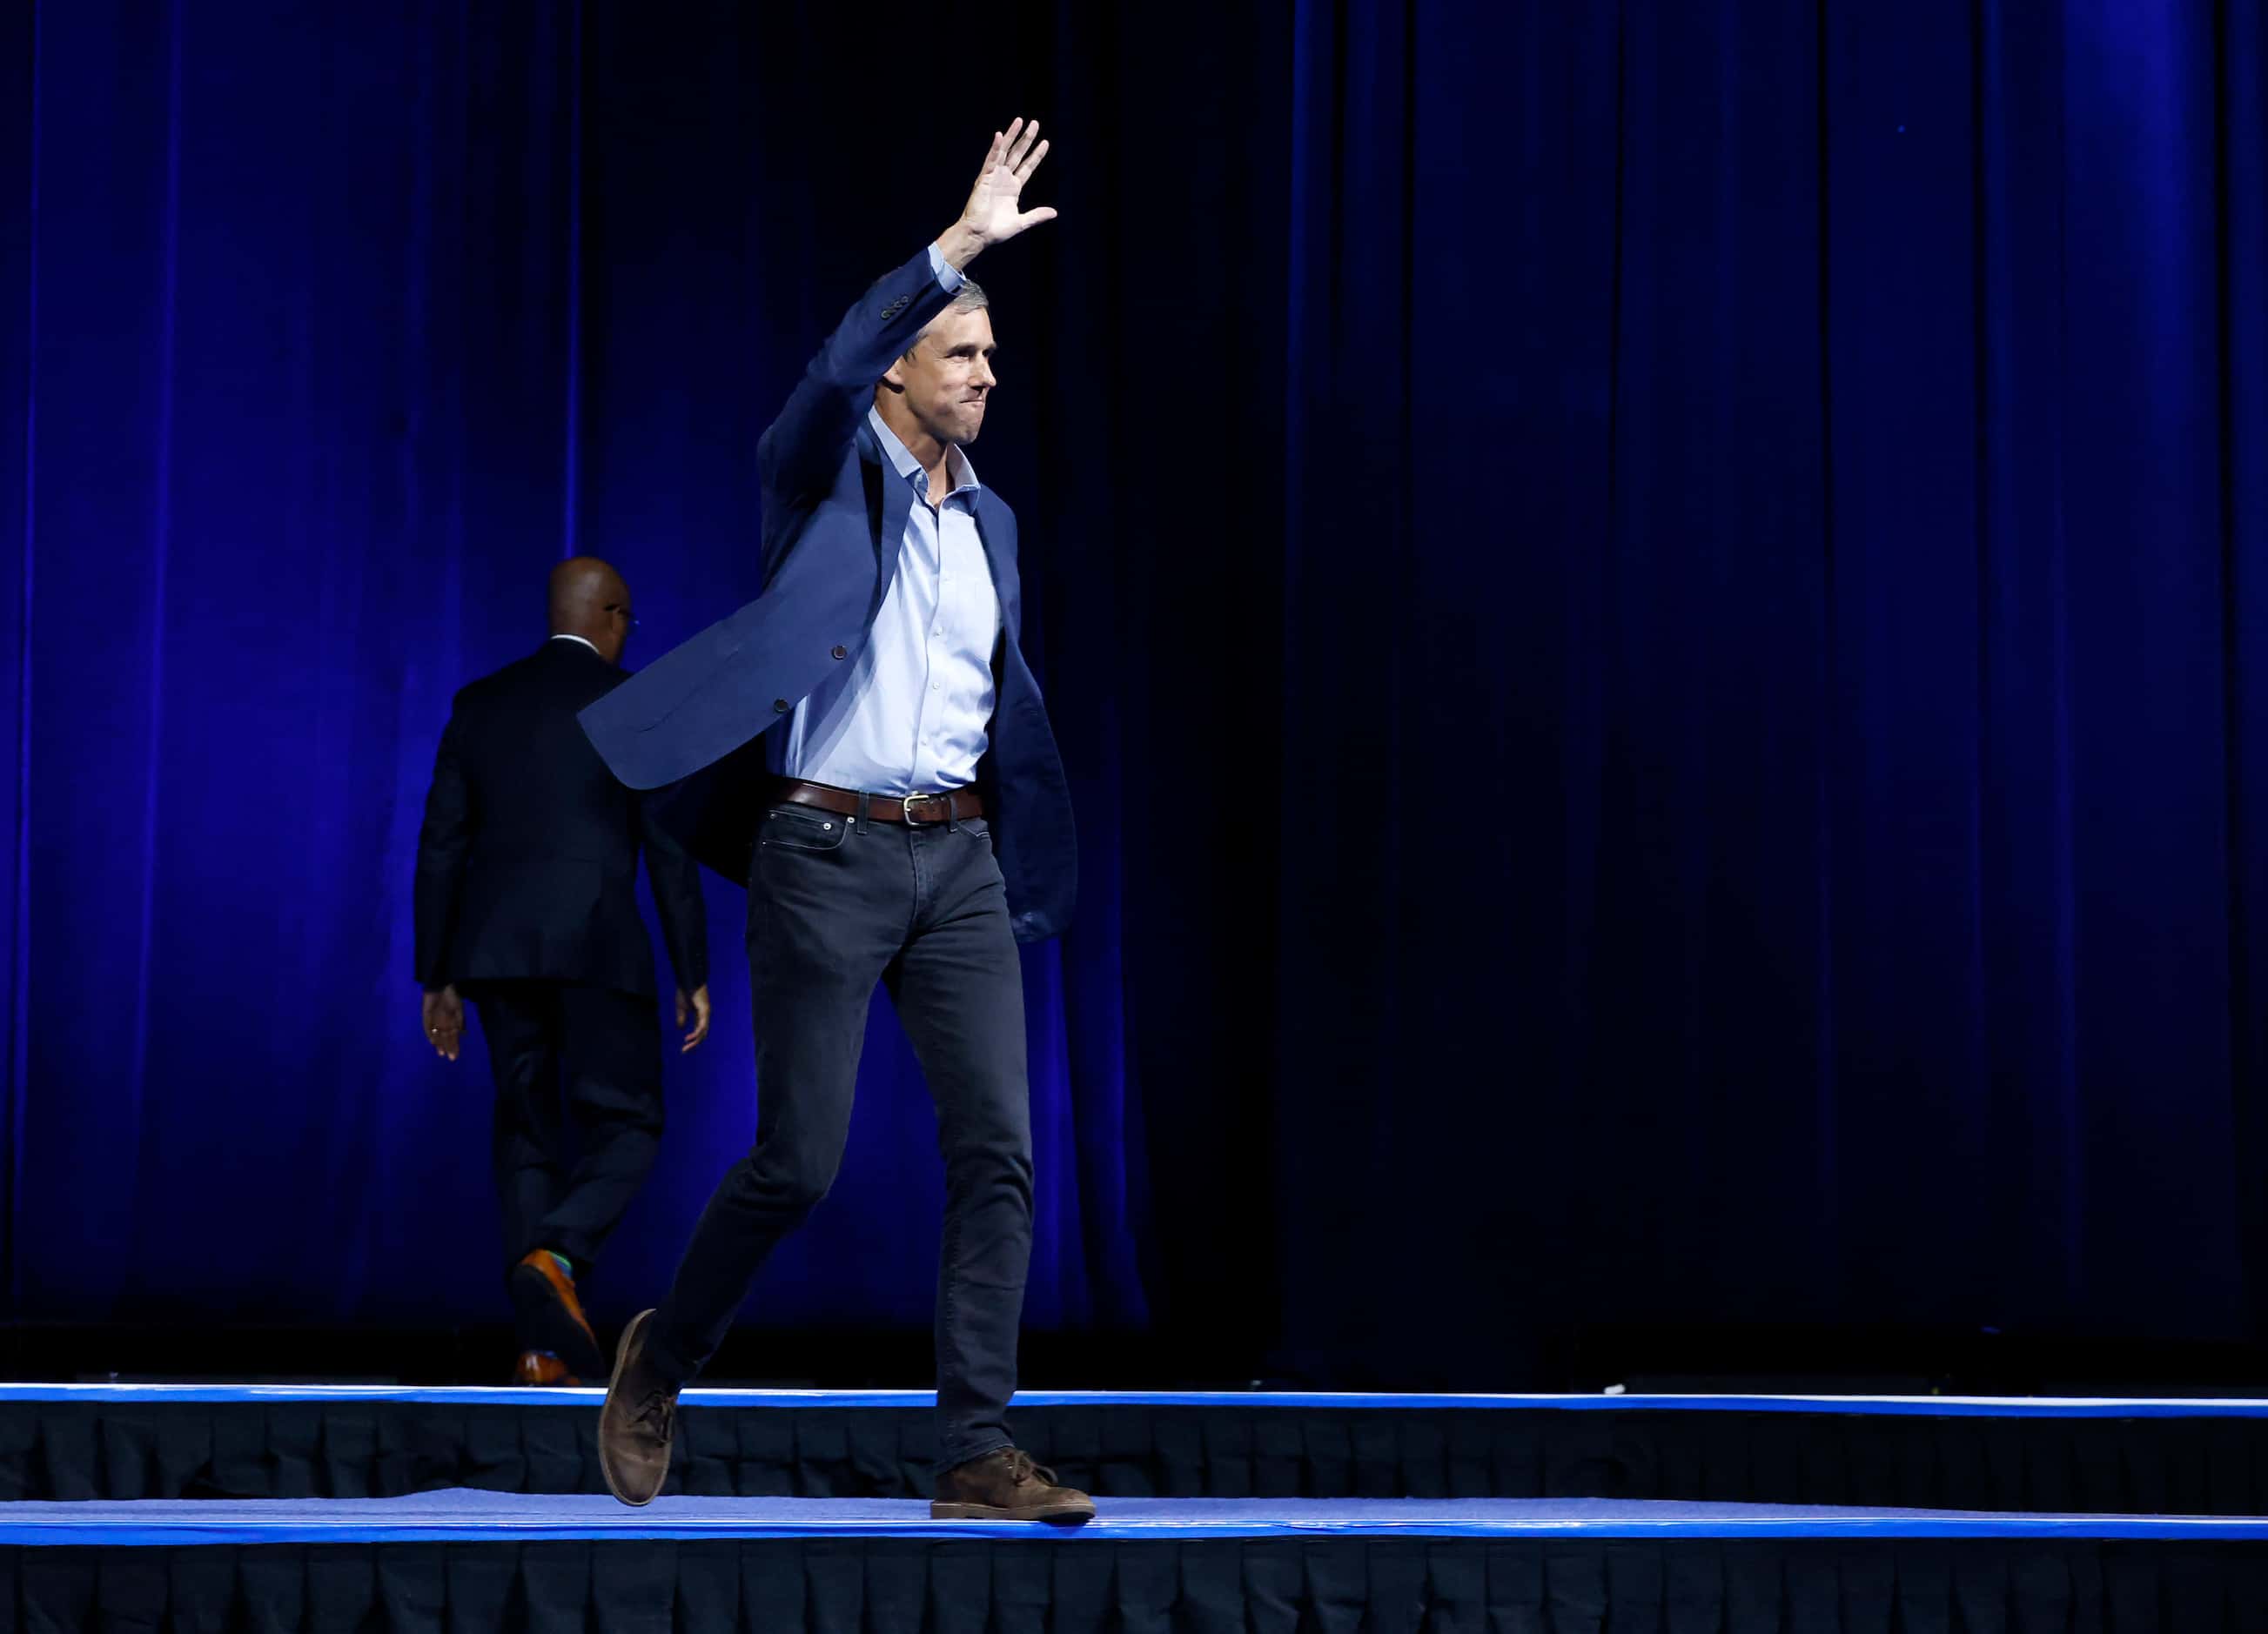 Democratic gubernatorial challenger Beto O'Rourke walks on-stage to deliver his speech to...